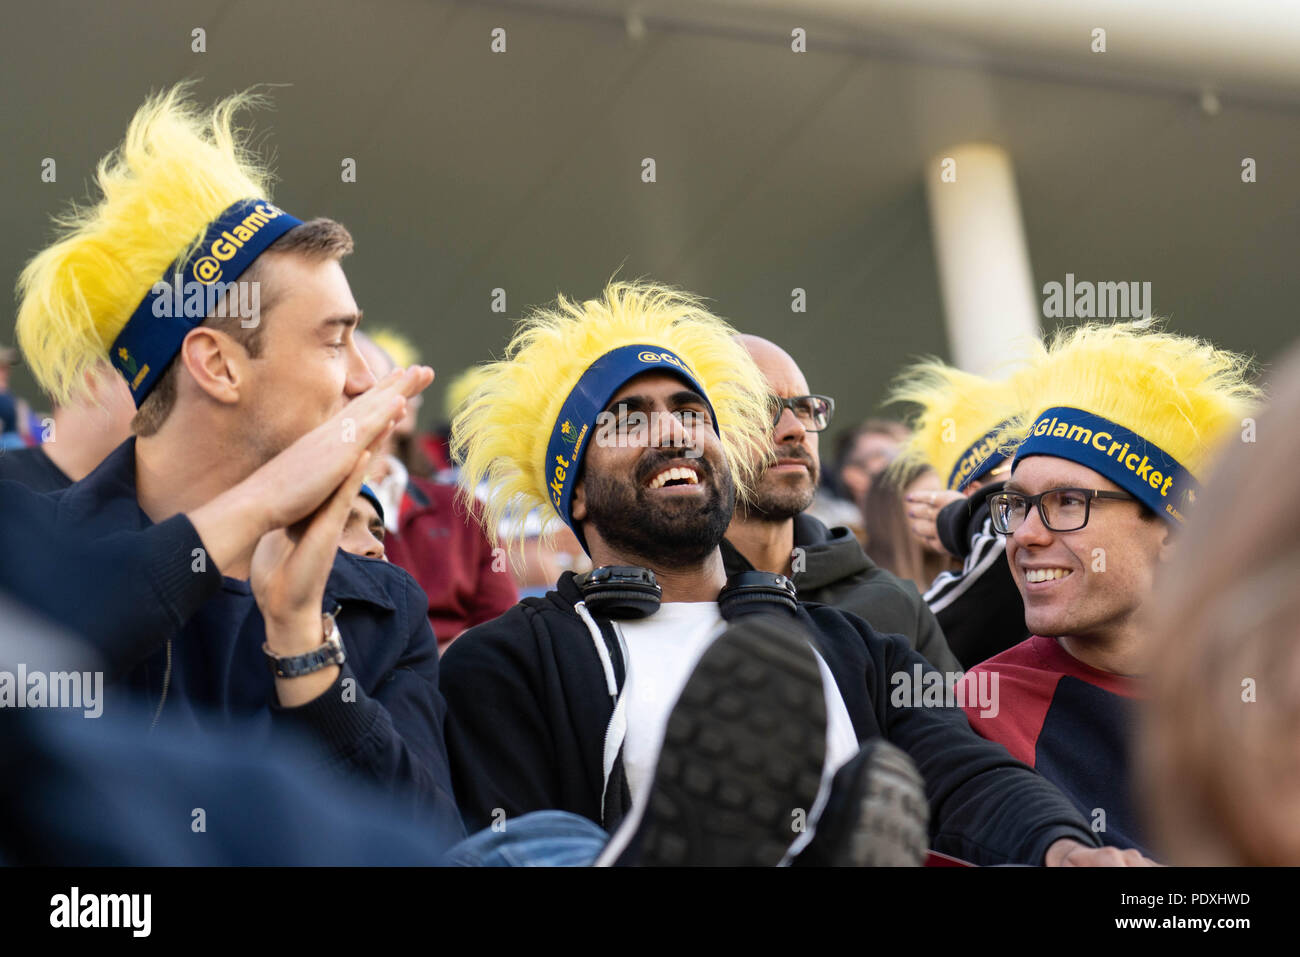 Sophia Gardens, Cardiff, Wales, United Kingdom. Glamorgan hosted Hampshire for a crunch game in the Vitality Blast 20/20 Cricket South Group Stage on 10 August 2018 at Sophia Gardens in Cardiff. Pictured: Atmosphere from the stands. Credit: Rob Watkins/Alamy Live News Stock Photo